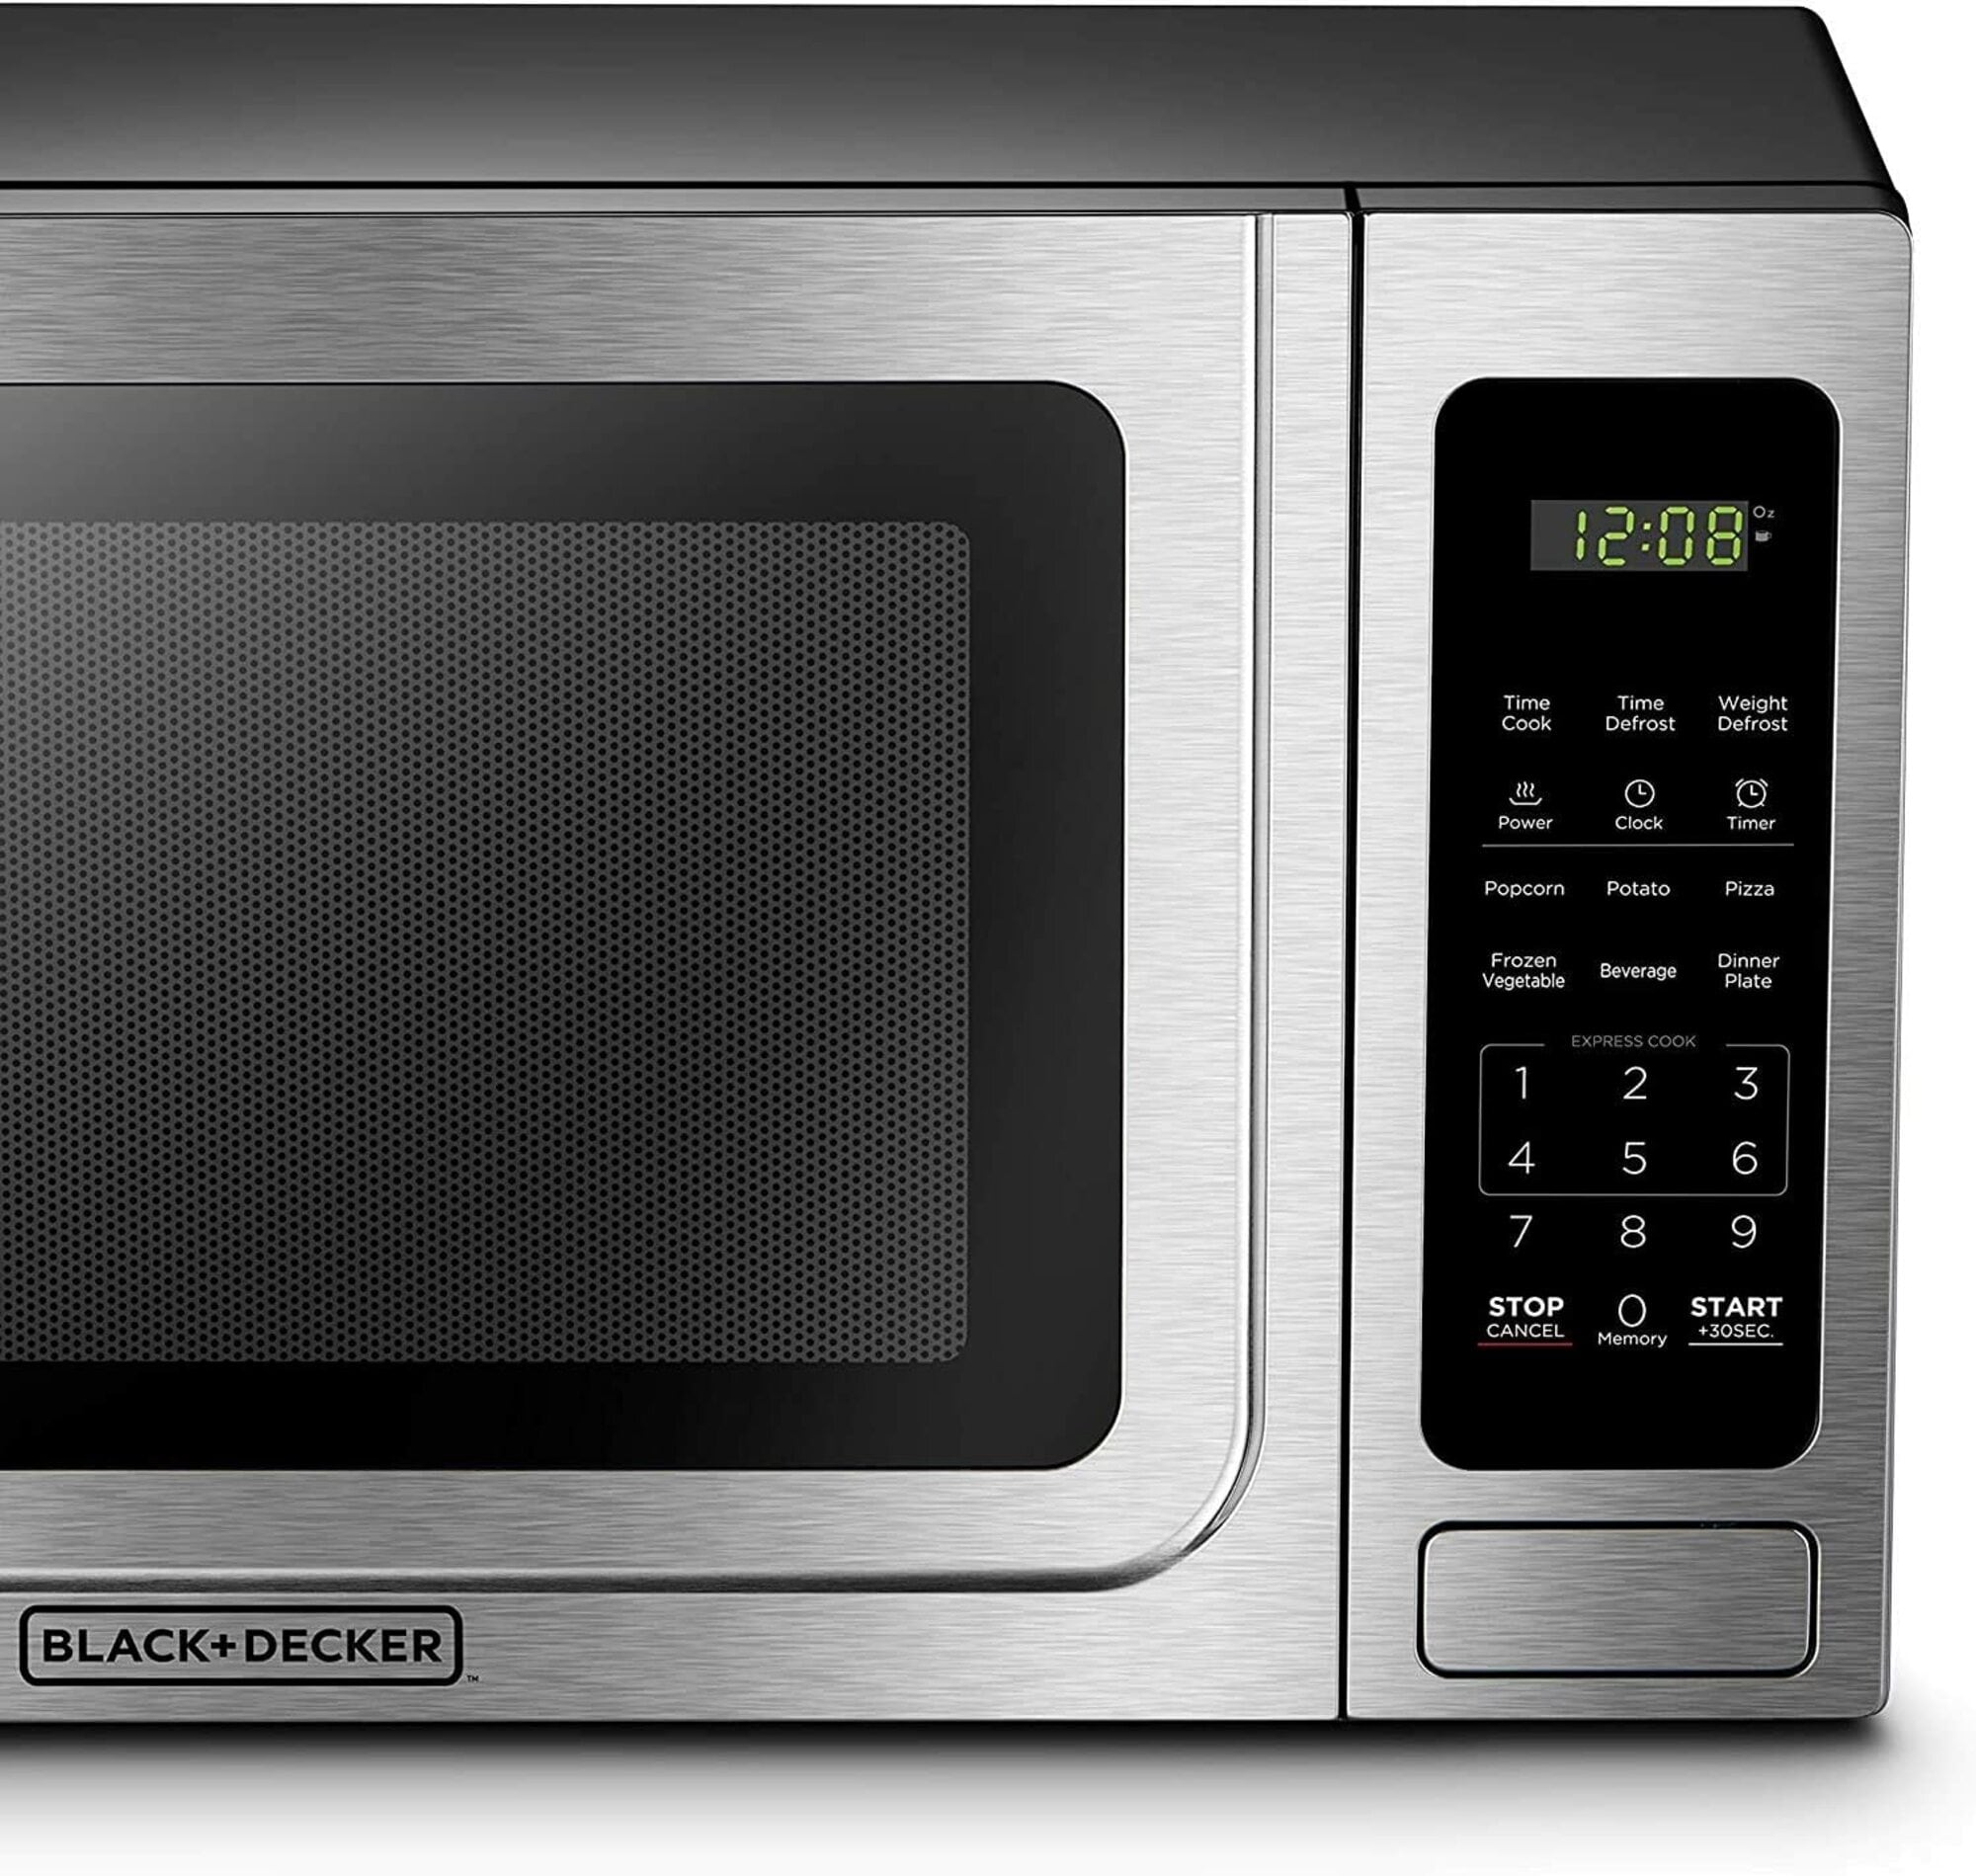  COMMERCIAL CHEF 1.4 Cubic Foot Microwave with 10 Power Levels,  Small Microwave with Push Button, 1100 Watt Microwave with Digital Control  Panels, Countertop Microwave with Timer, White : Home & Kitchen